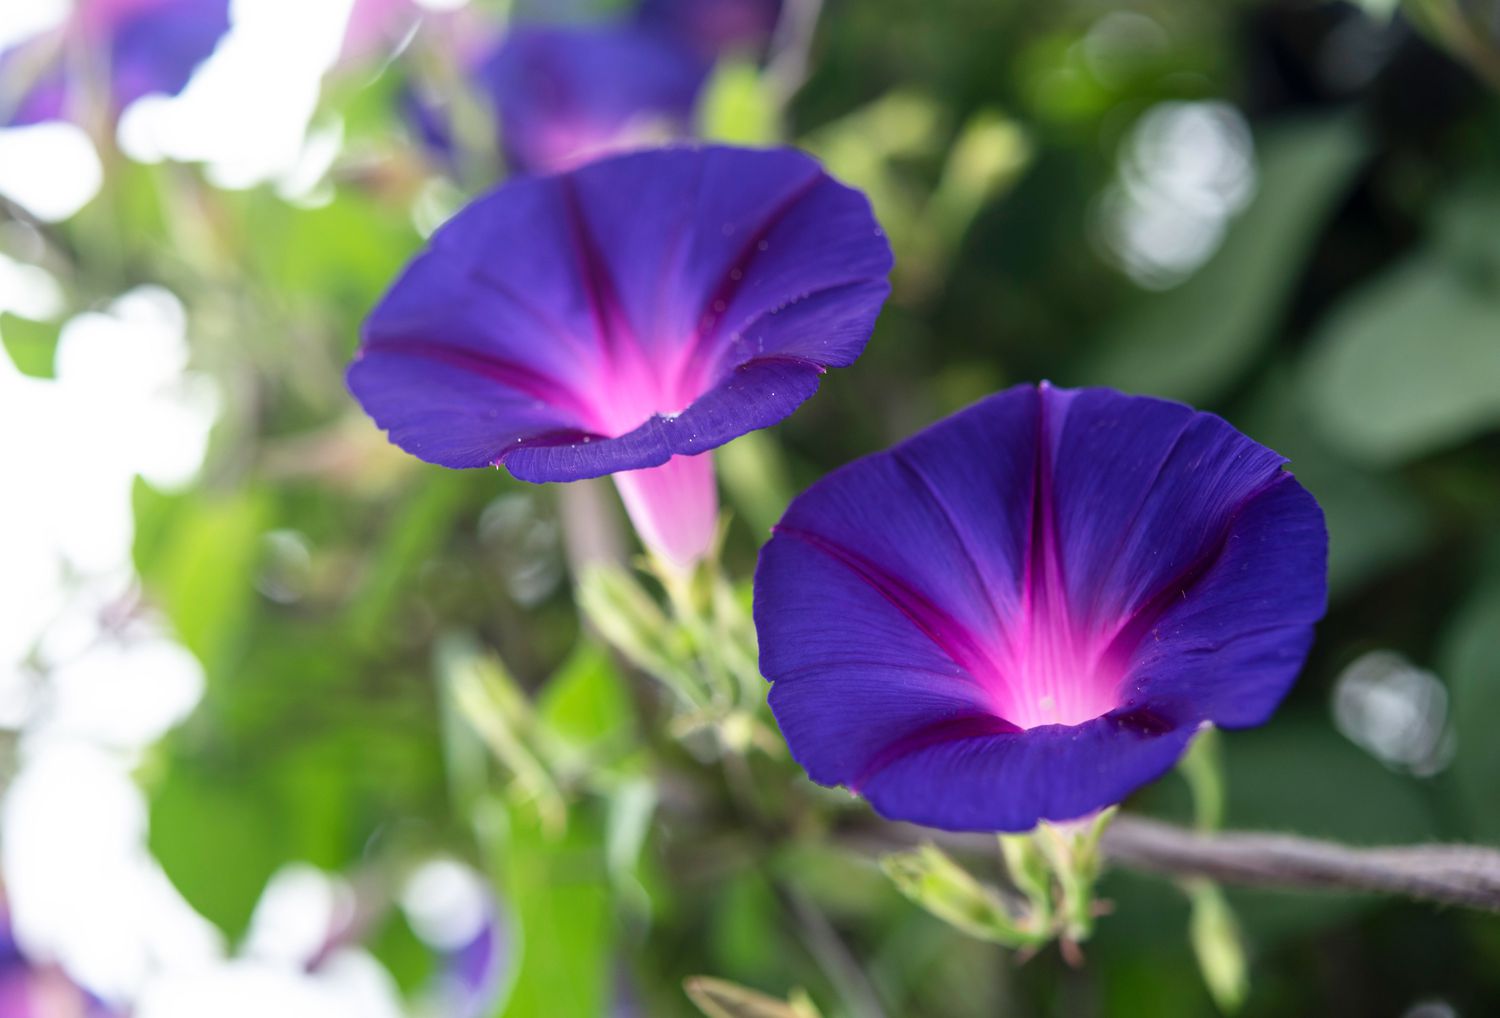 Morning glory plant with deep purple trumpet-shaped flowers with pink centers